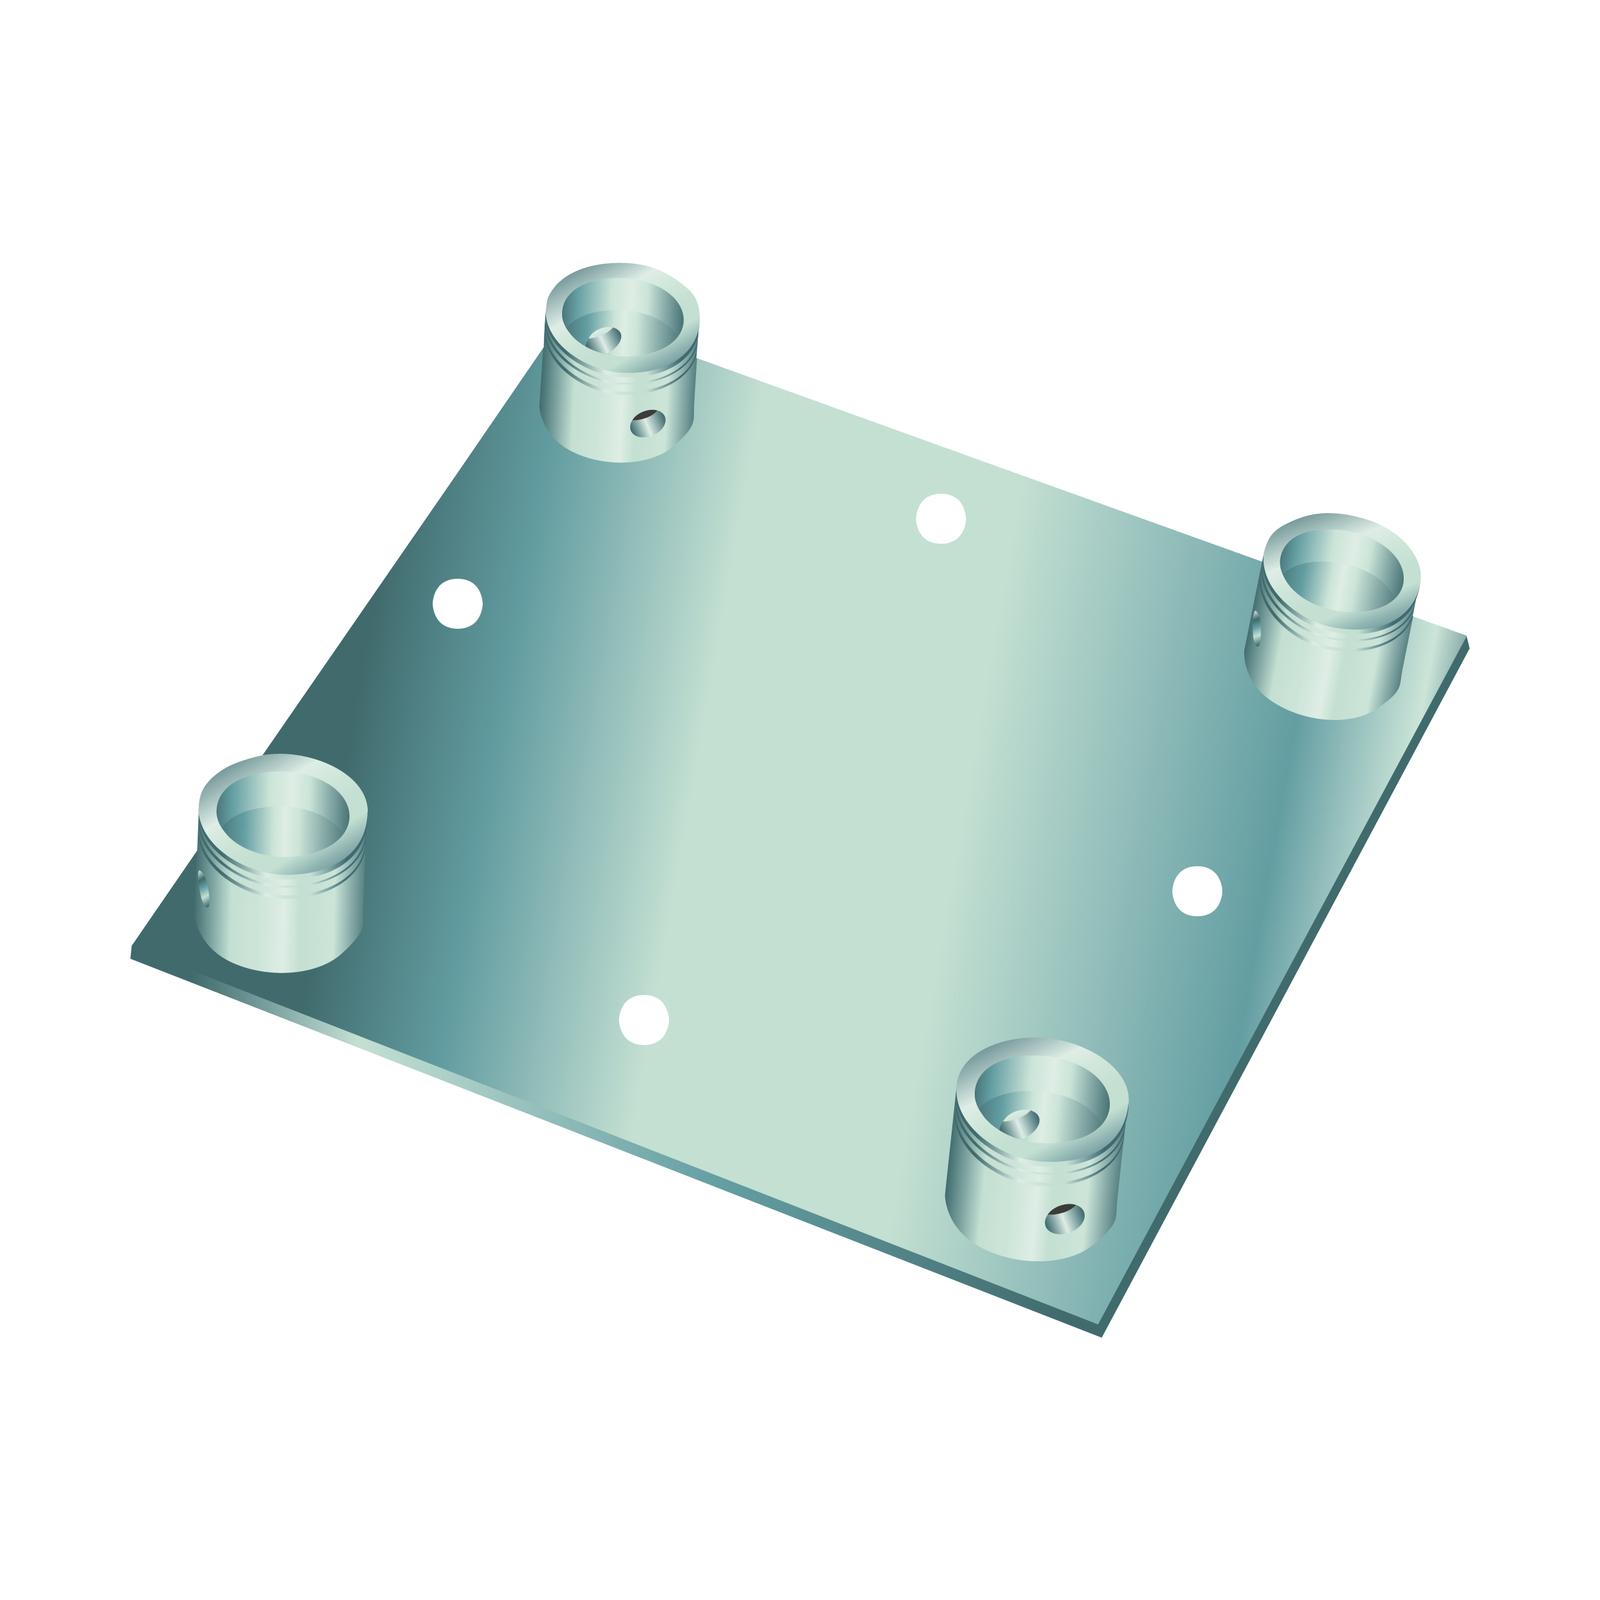 ALUTRUSS DECOLOCK DQ4-WP Wall Mounting Plate bk